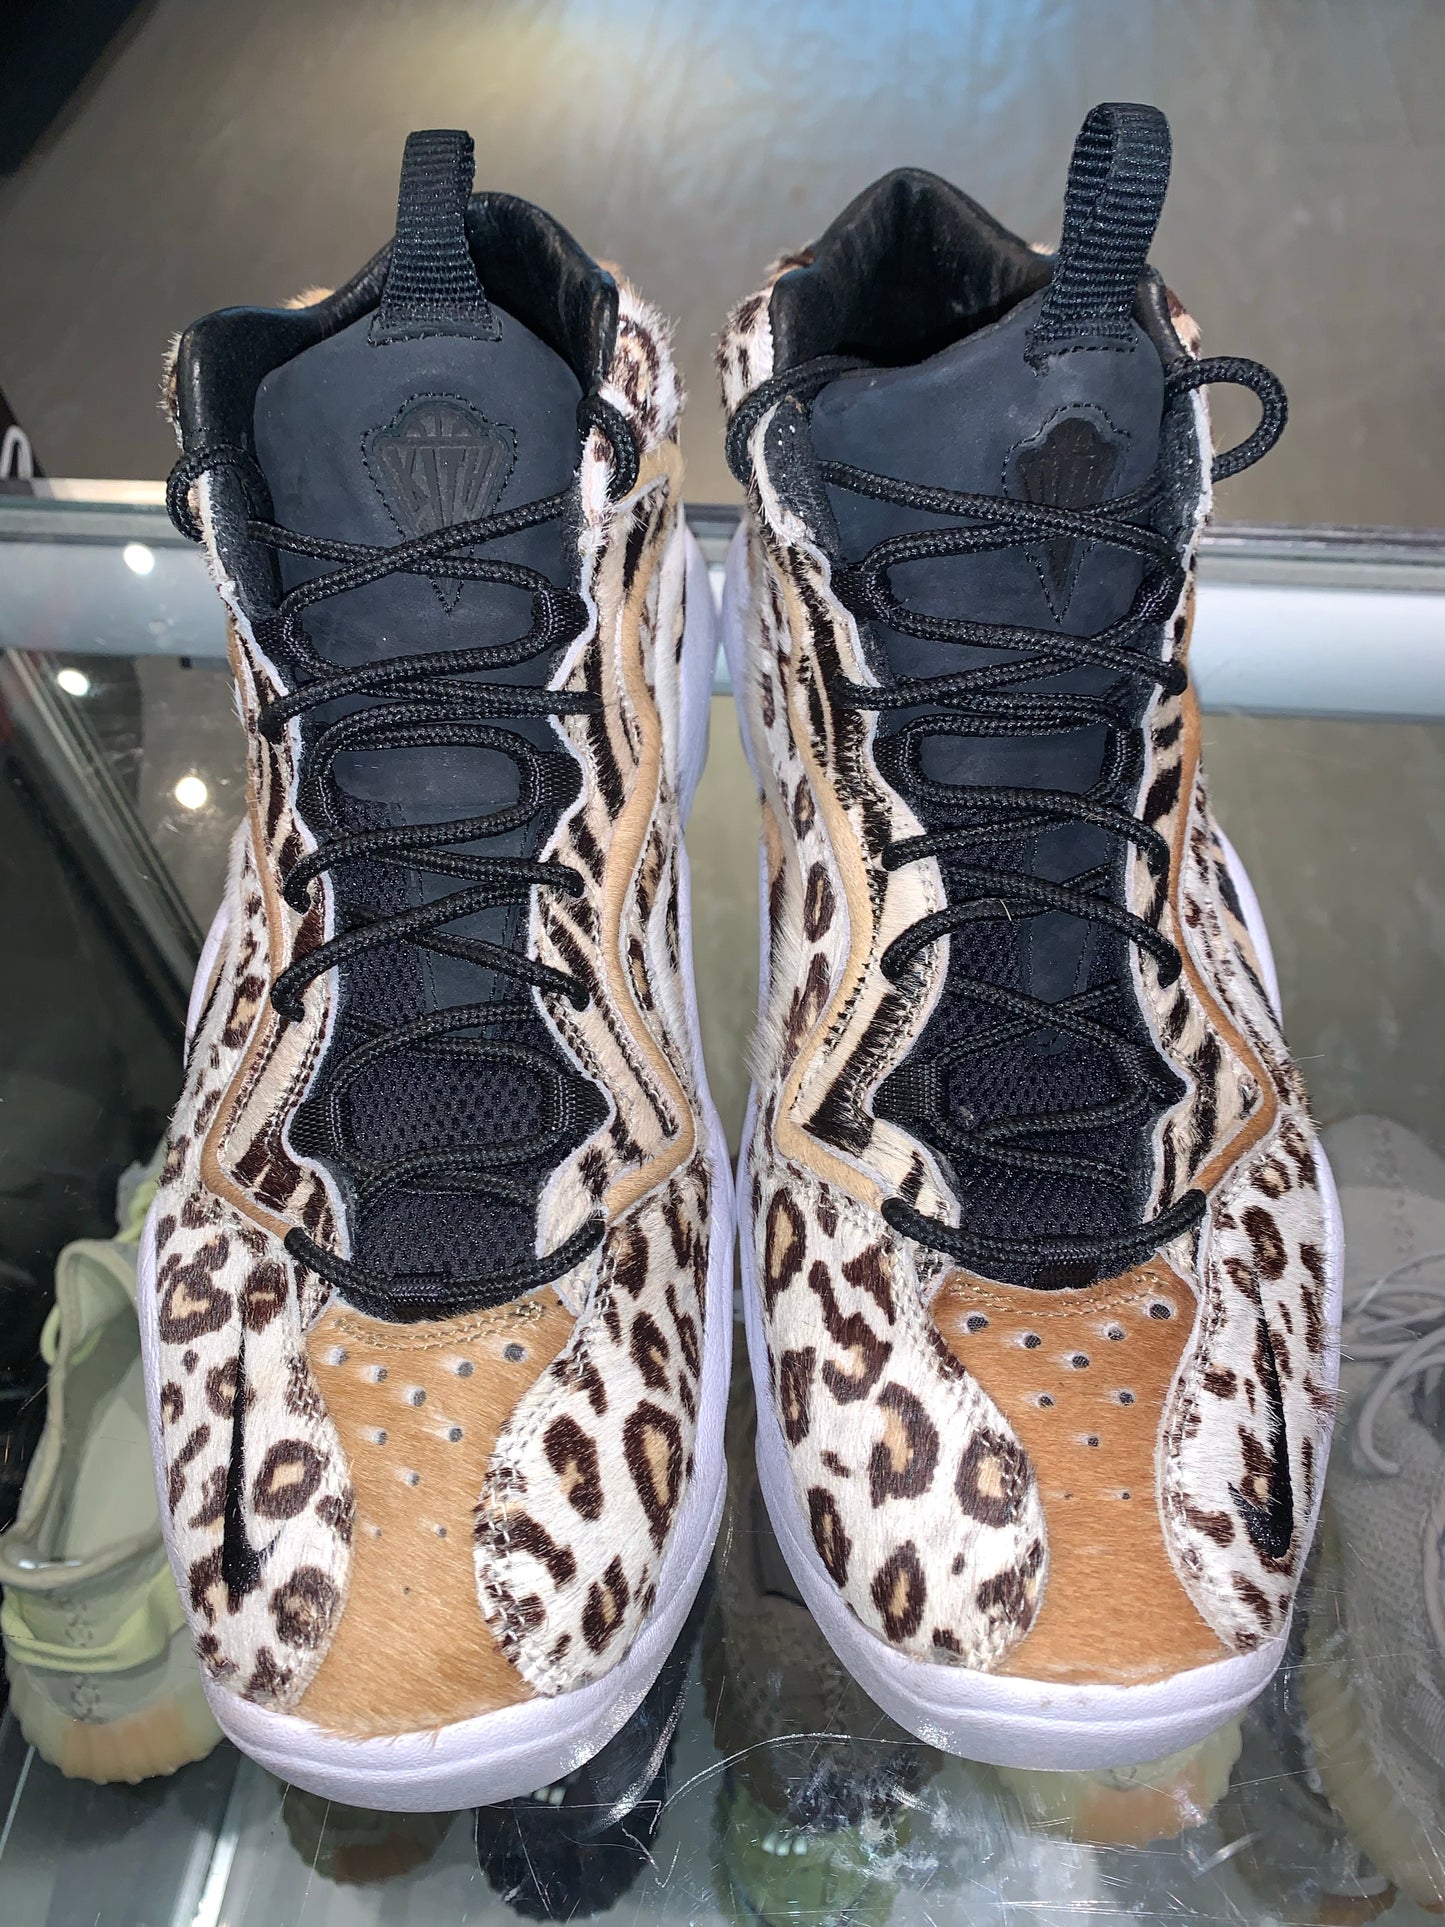 Size 11.5 Air Pippen 1 Kith “Animal Print” (Mall)